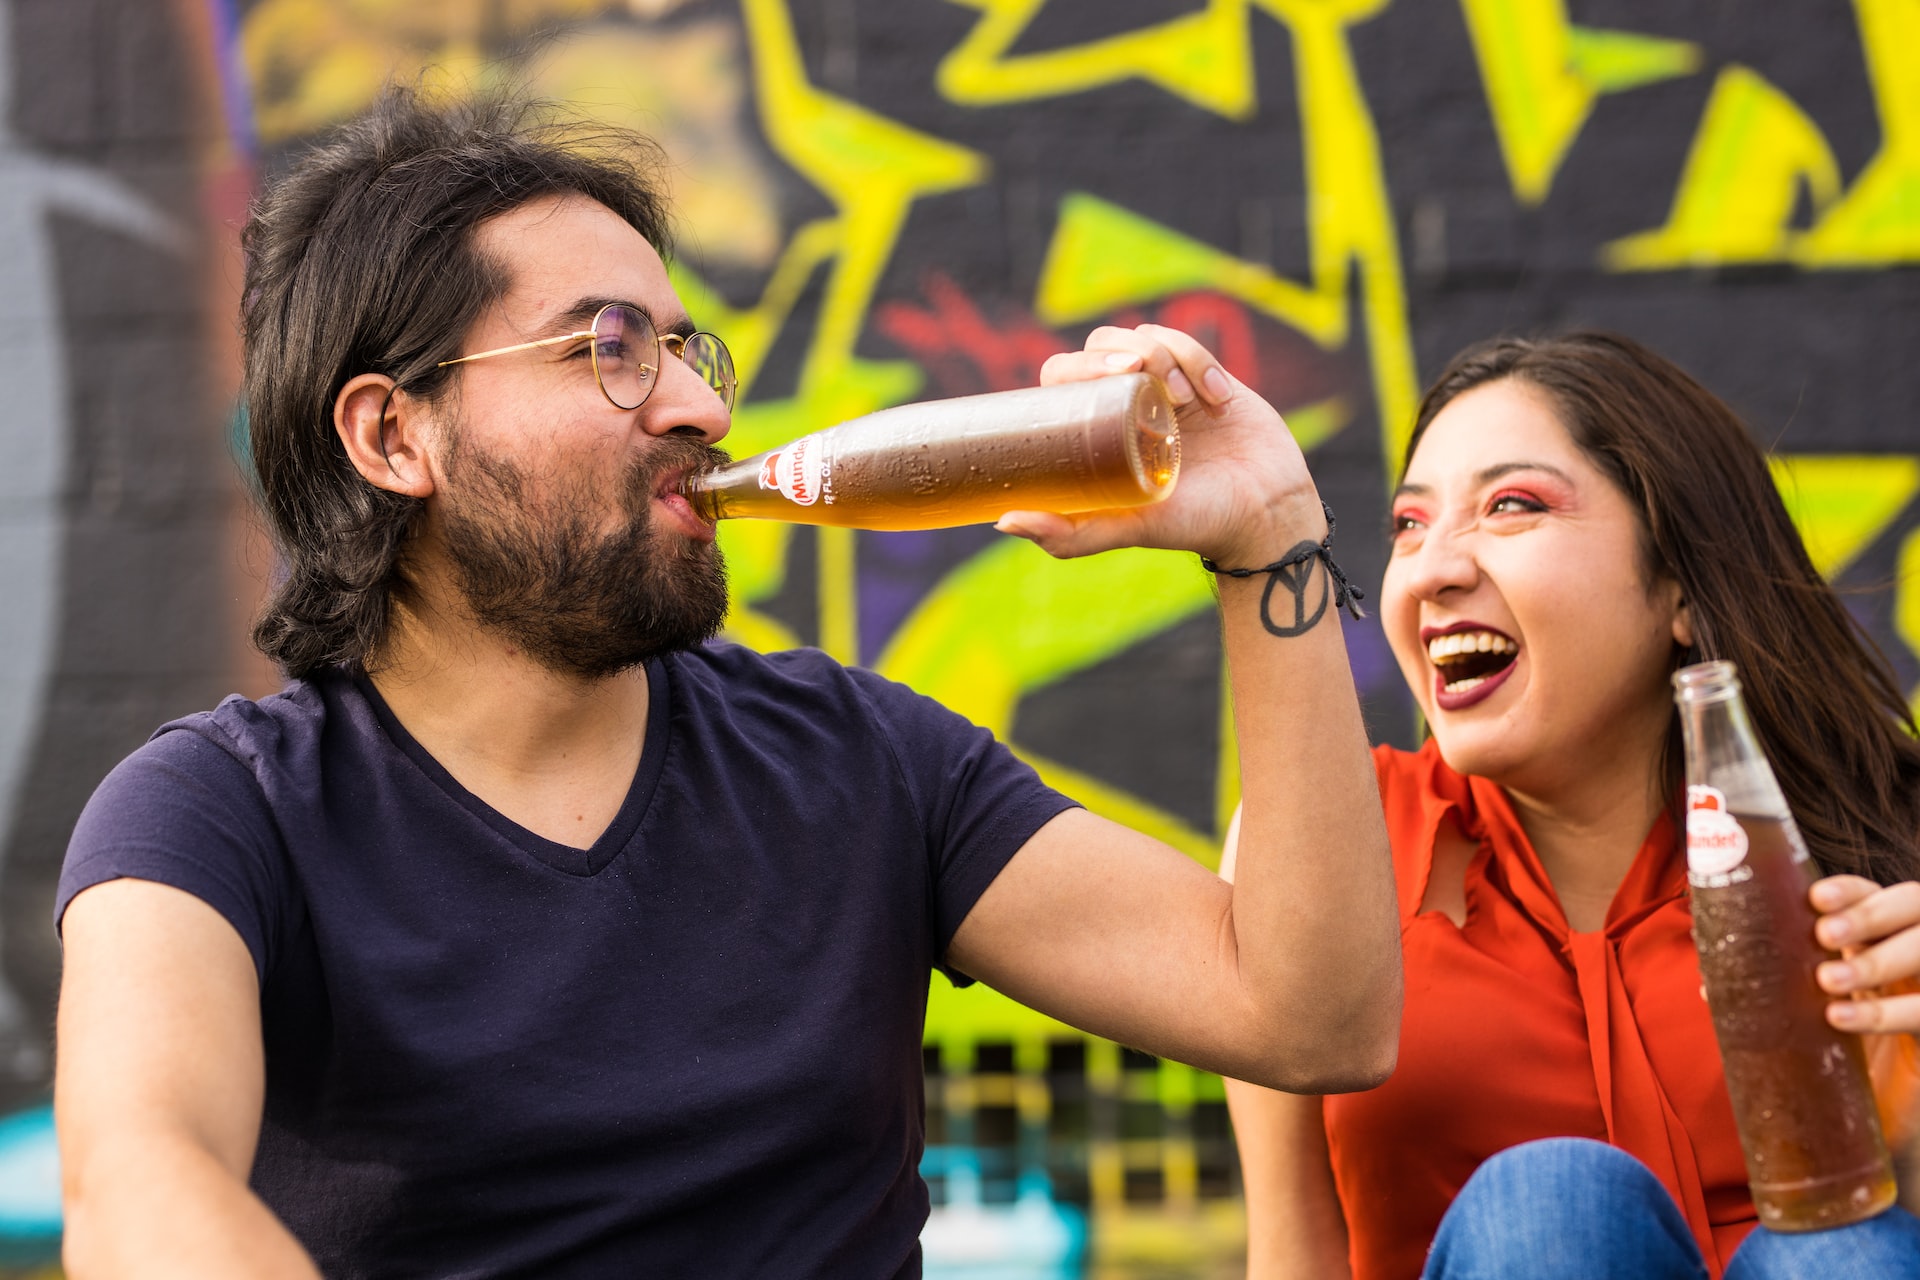 Man and woman drinking a beer.